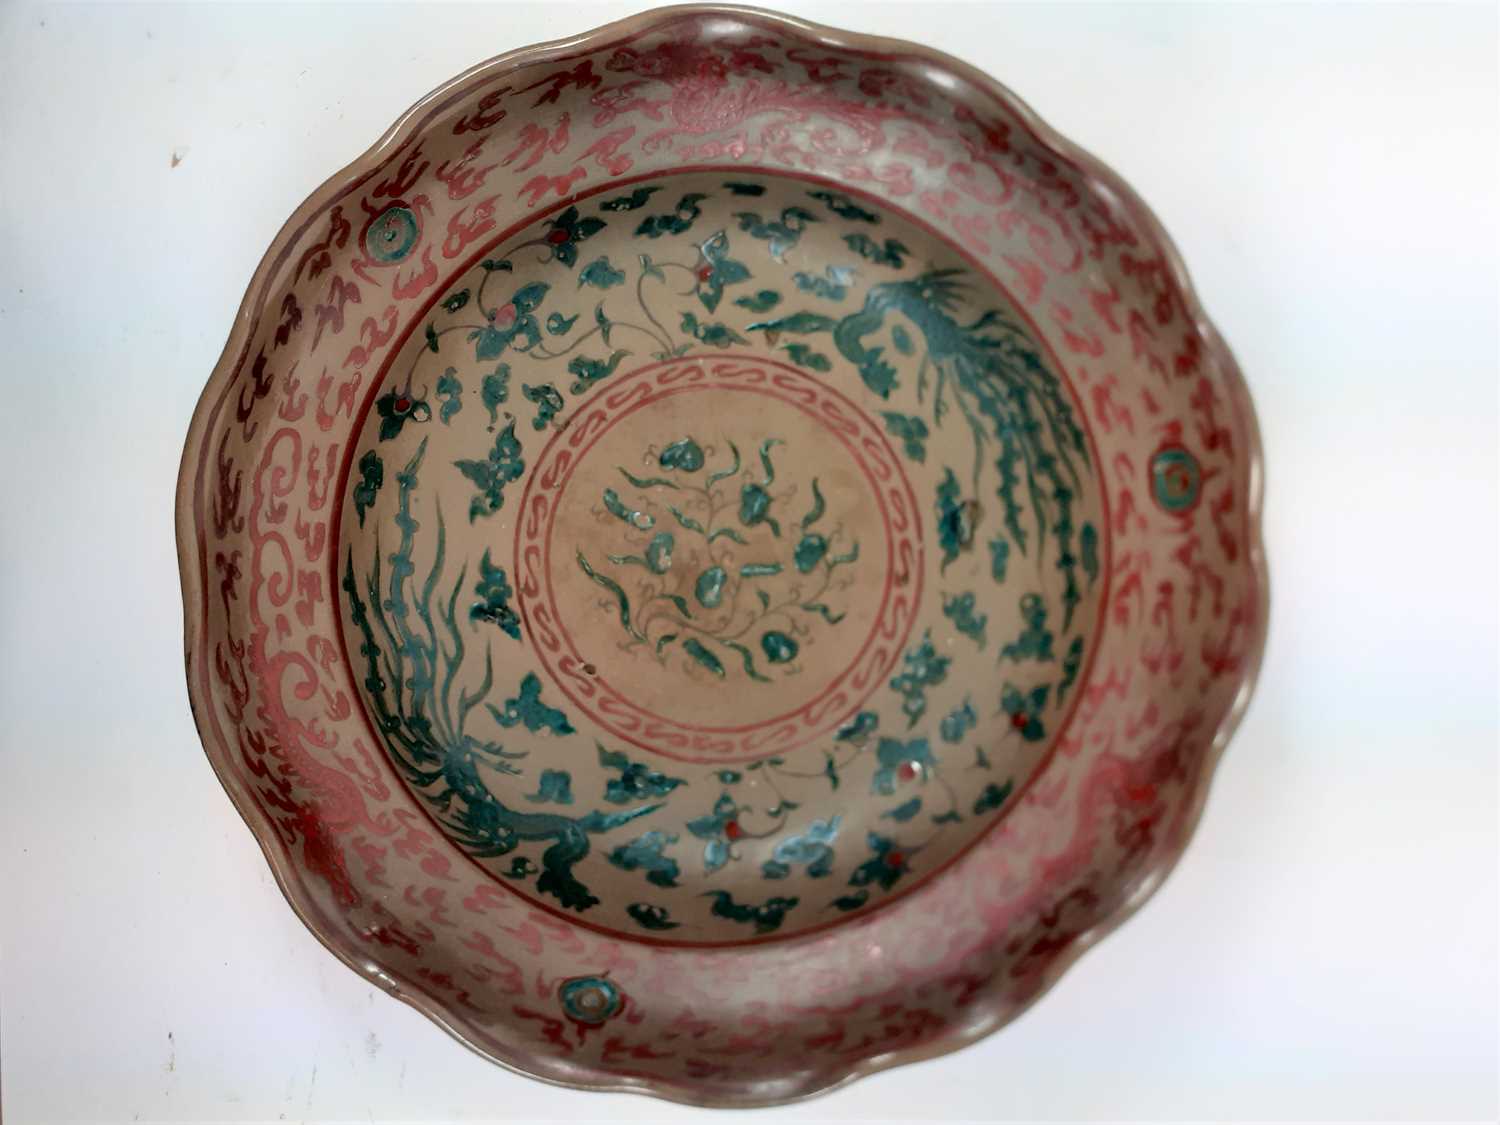 A Zhangzhou Ware Bowl, in 17th century style, painted in red and green with figures in landscape and - Image 9 of 20